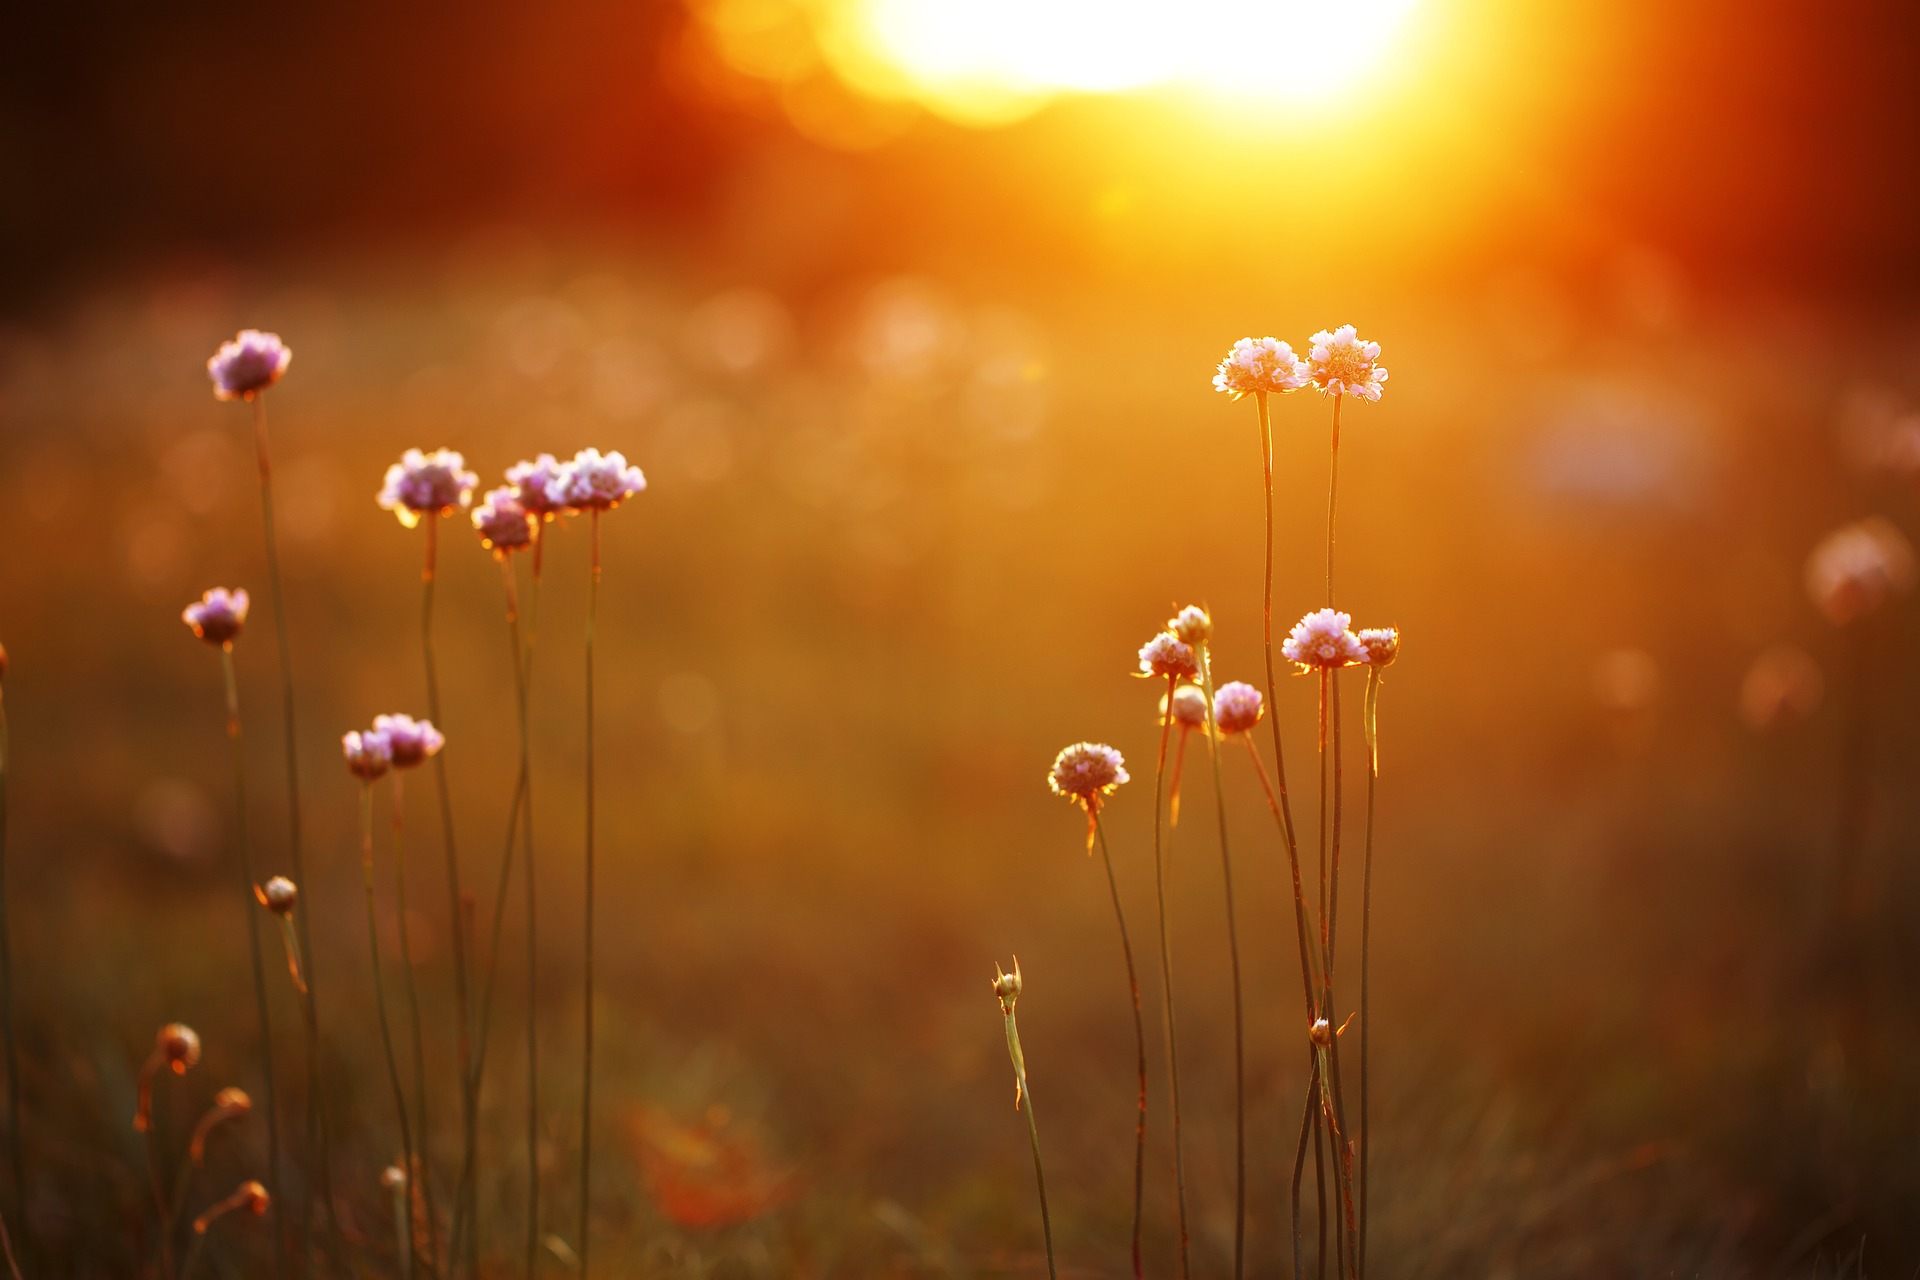 Flowers silhouetted against the sun near the horizon.